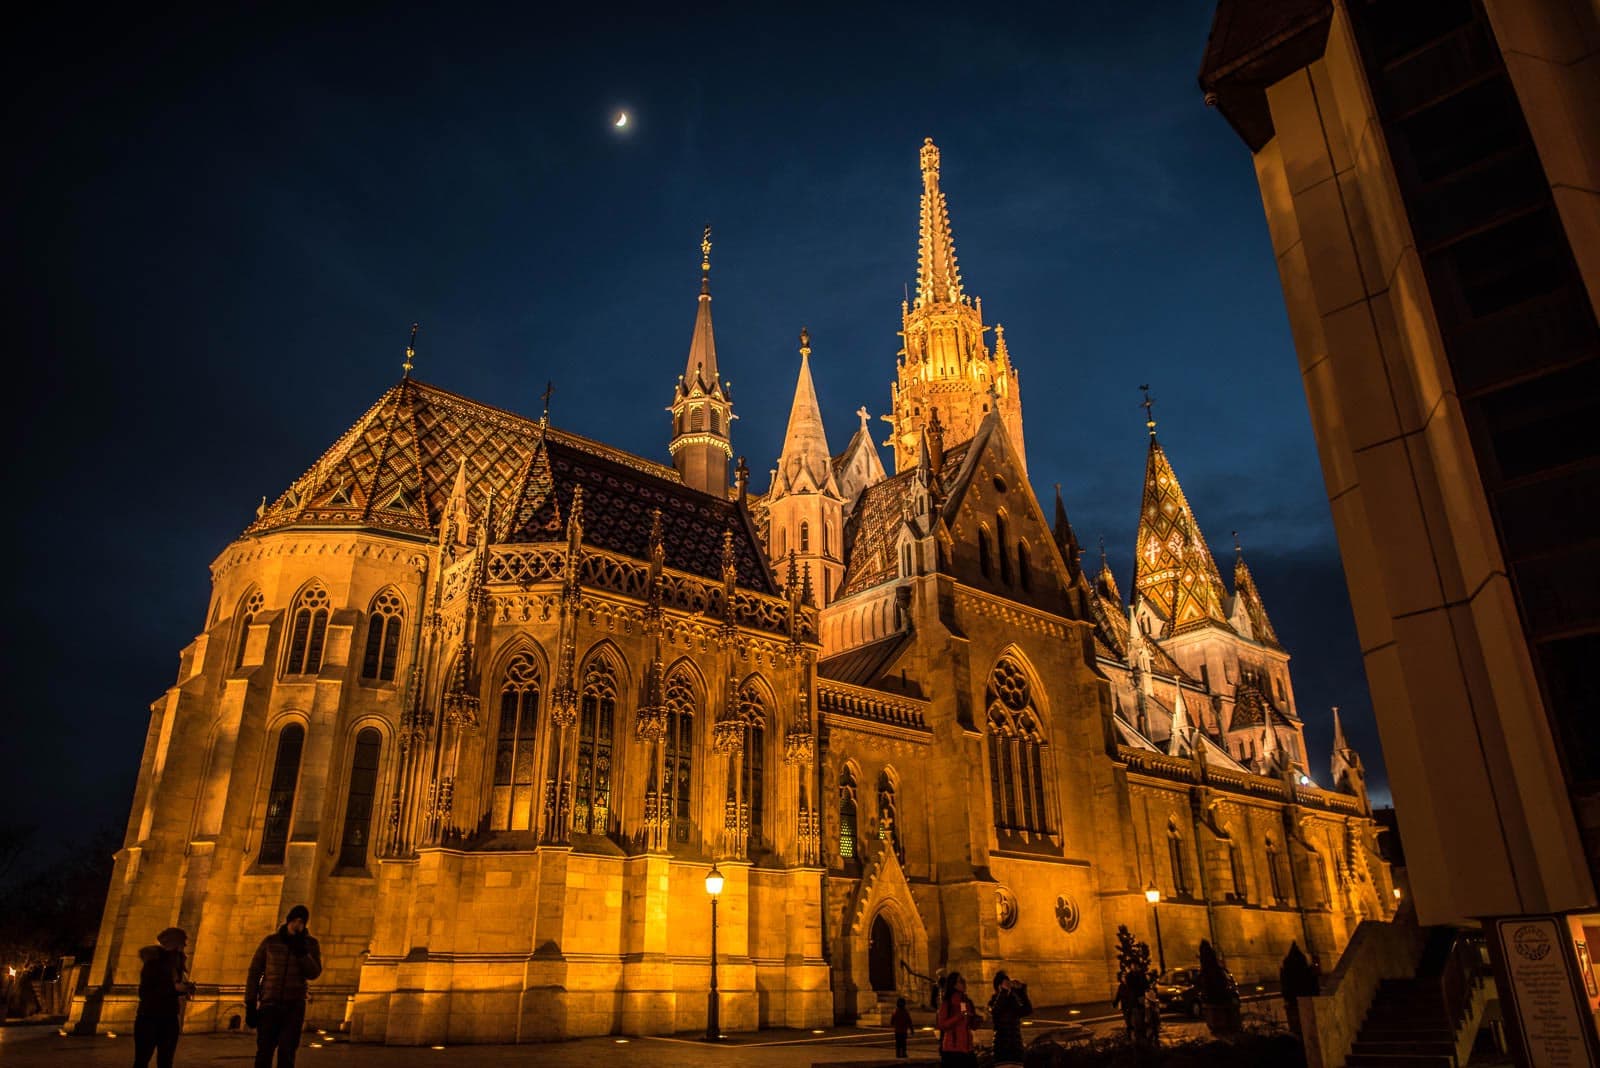 The hungarian parliament building lit up at night.